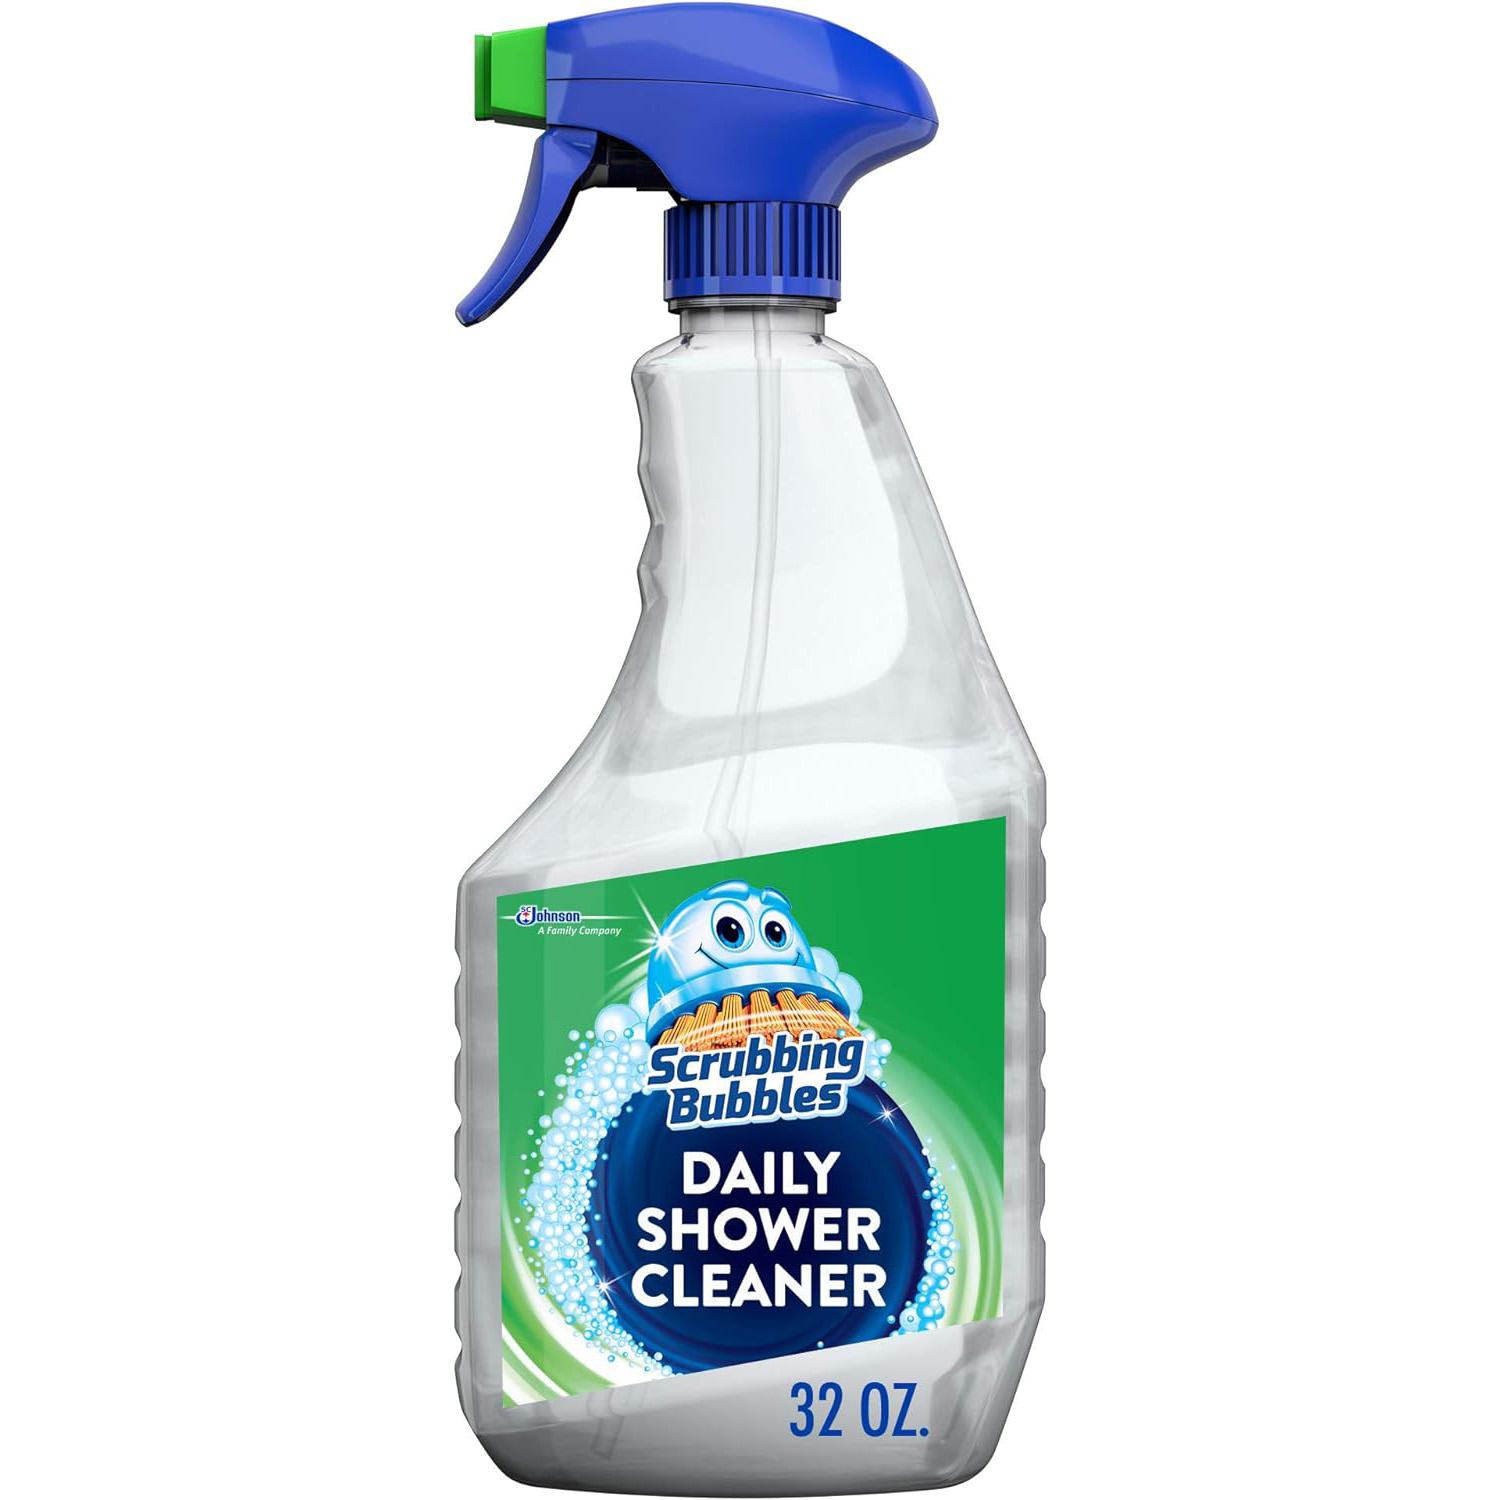 Scrubbing Bubbles Daily Shower and Bathroom Cleaner for $2.70 Shipped